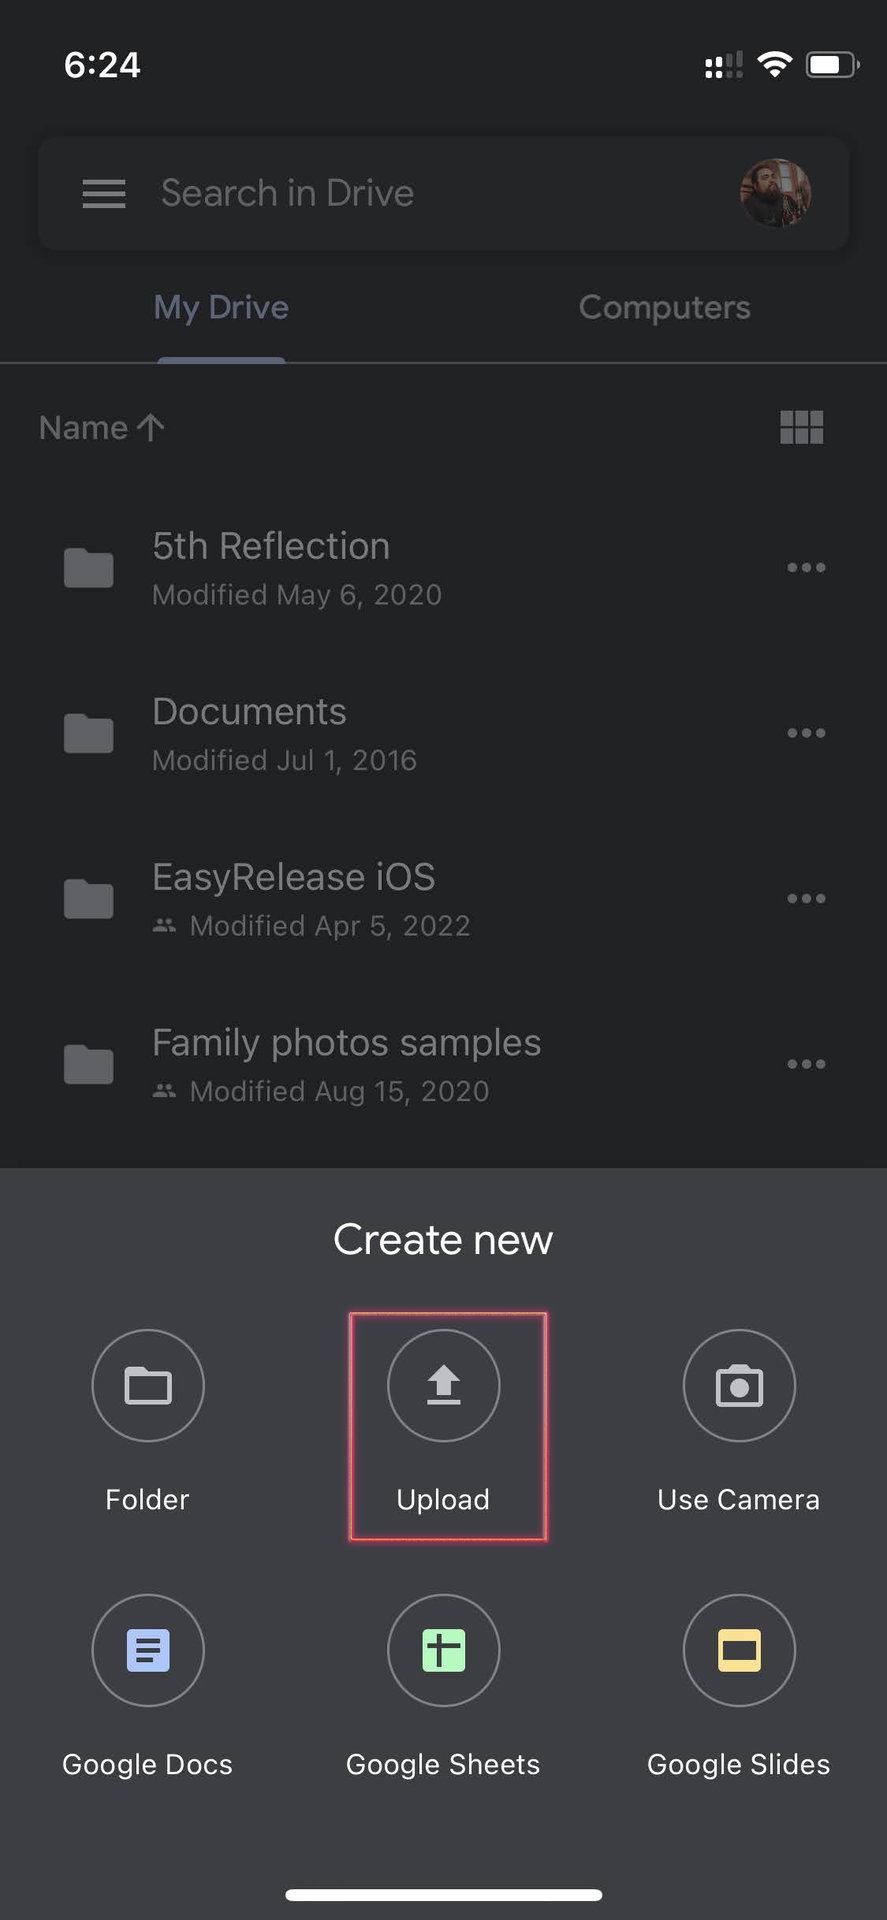 Transfer photos from iPhone to Android using Google Drive 2